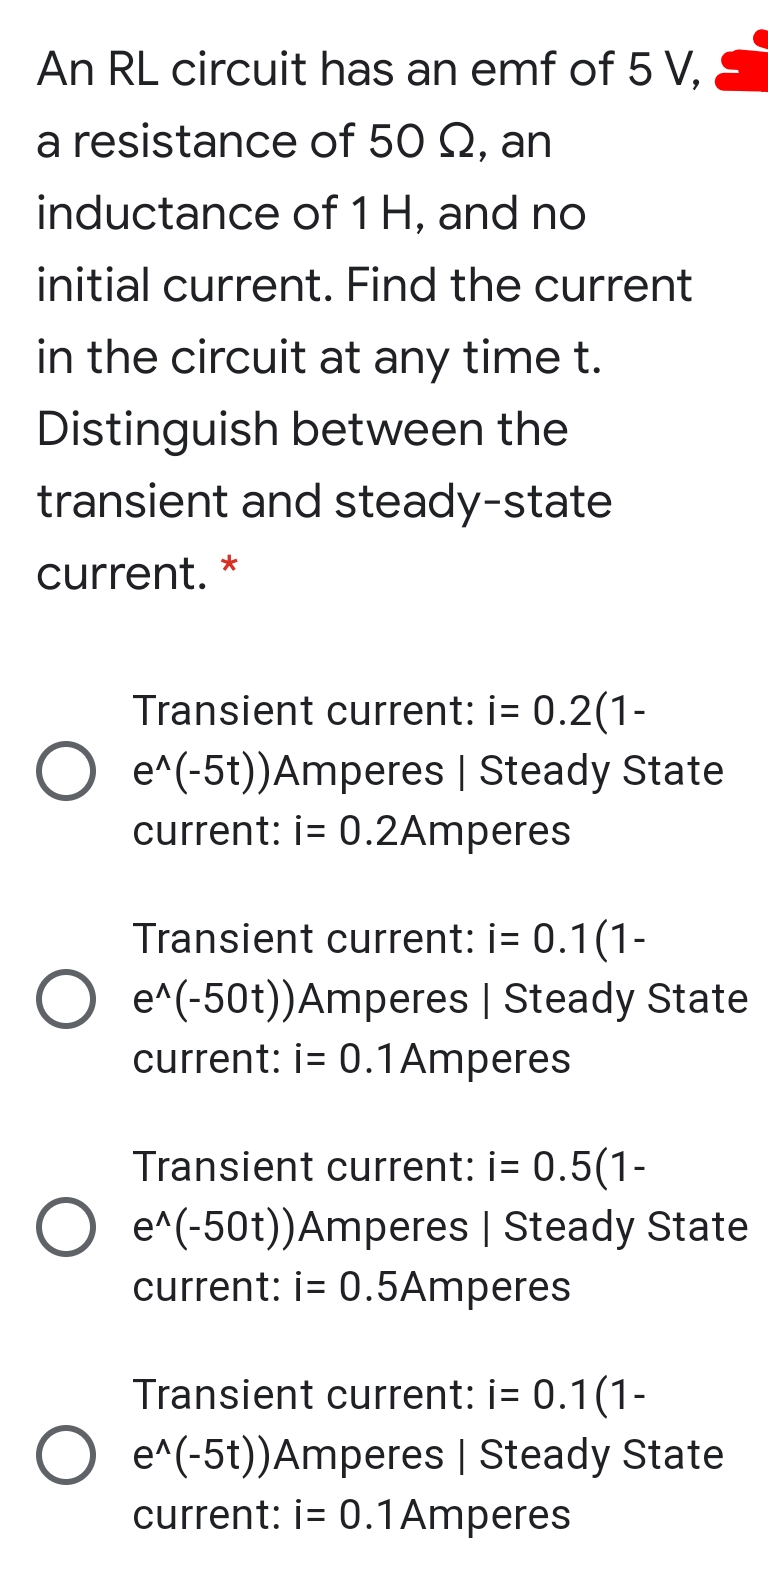 An RL circuit has an emf of 5 V,
a resistance of 50 Q, an
inductance of 1 H, and no
initial current. Find the current
in the circuit at any time t.
Distinguish between the
transient and steady-state
current. *
Transient current: i= 0.2(1-
O e^(-5t))Amperes | Steady State
current: i= 0.2Amperes
Transient current: i= 0.1(1-
O e^(-50t))Amperes | Steady State
current: i= 0.1Amperes
Transient current: i= 0.5(1-
O e^(-50t))Amperes | Steady State
current: i= 0.5Amperes
Transient current: i= 0.1(1-
O e^(-5t))Amperes | Steady State
current: i= 0.1Amperes
